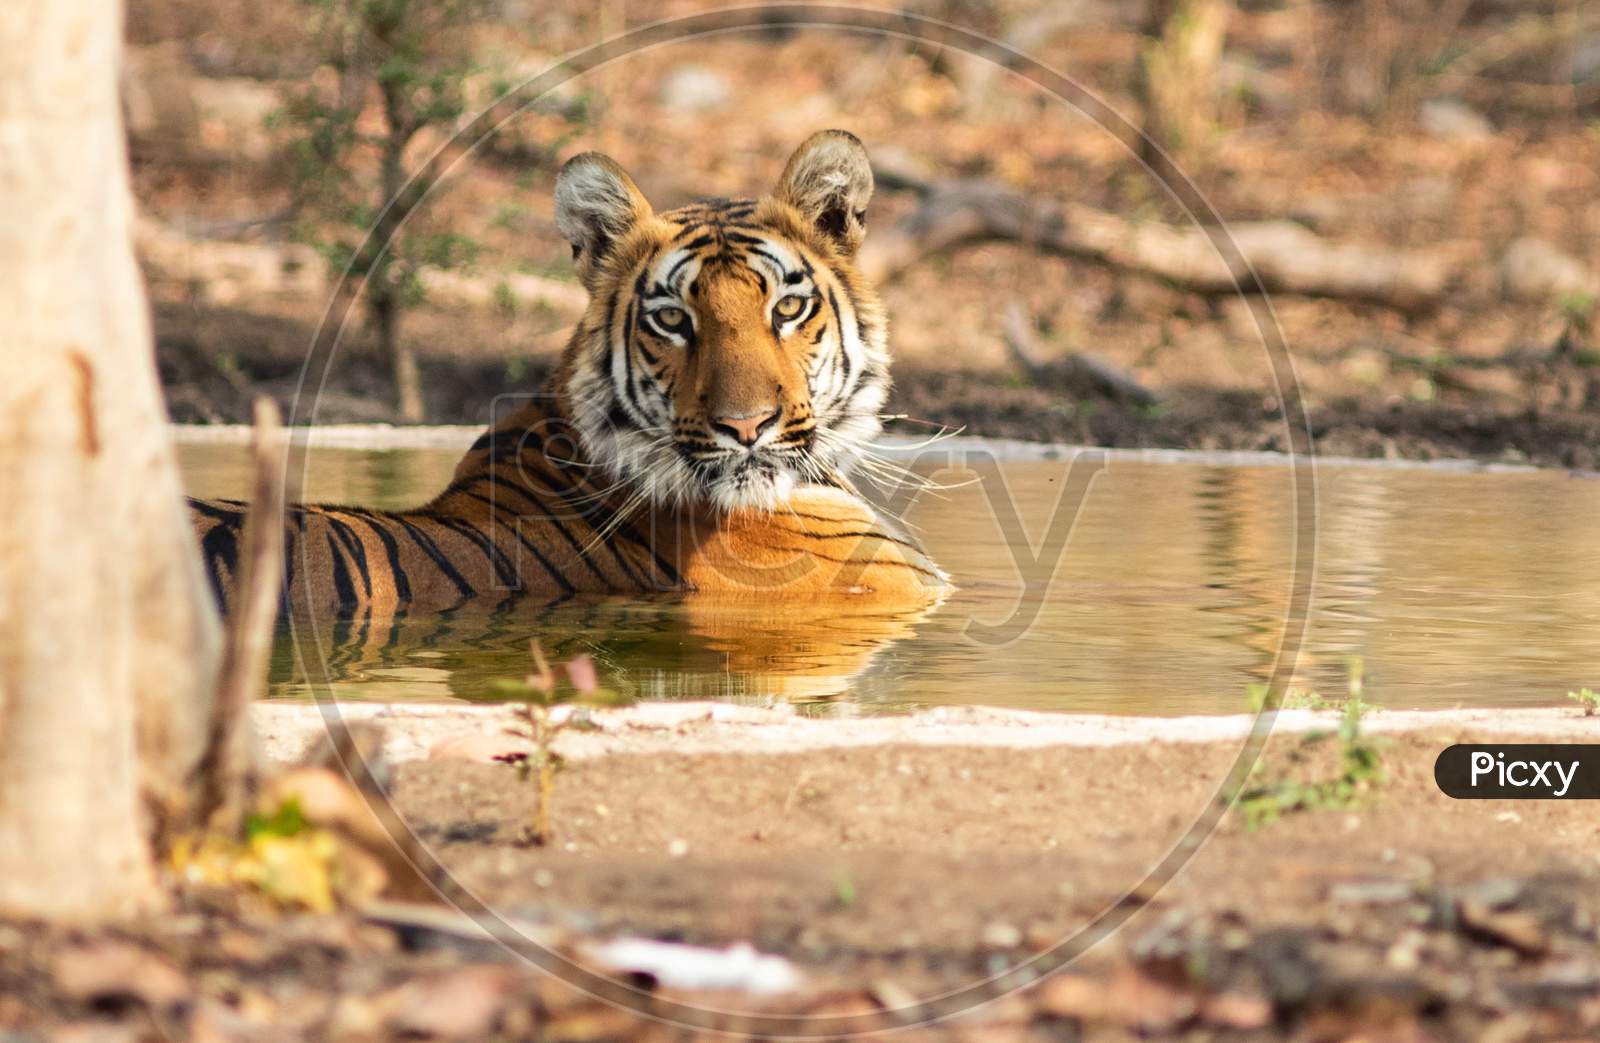 A tigress sitting and relaxing in an artificial pond